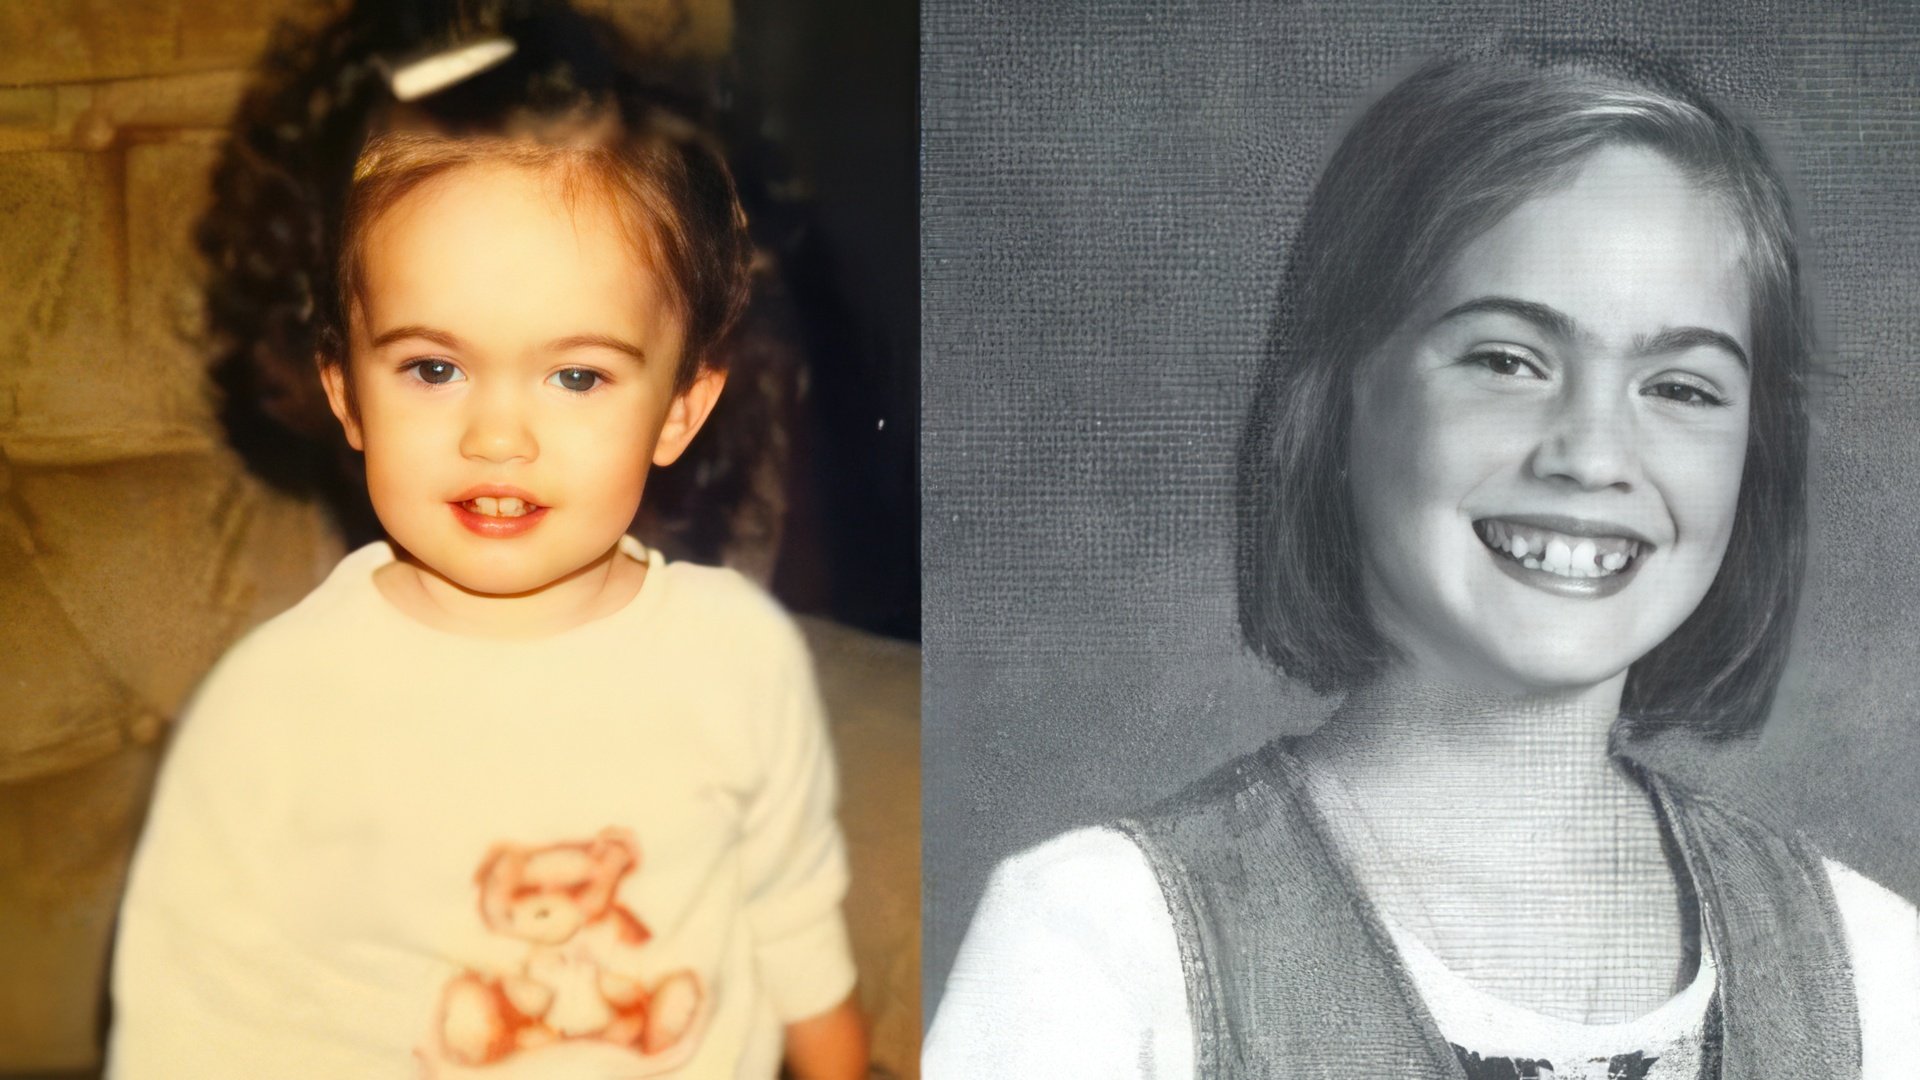 Megan Fox was an ugly duckling in her childhood